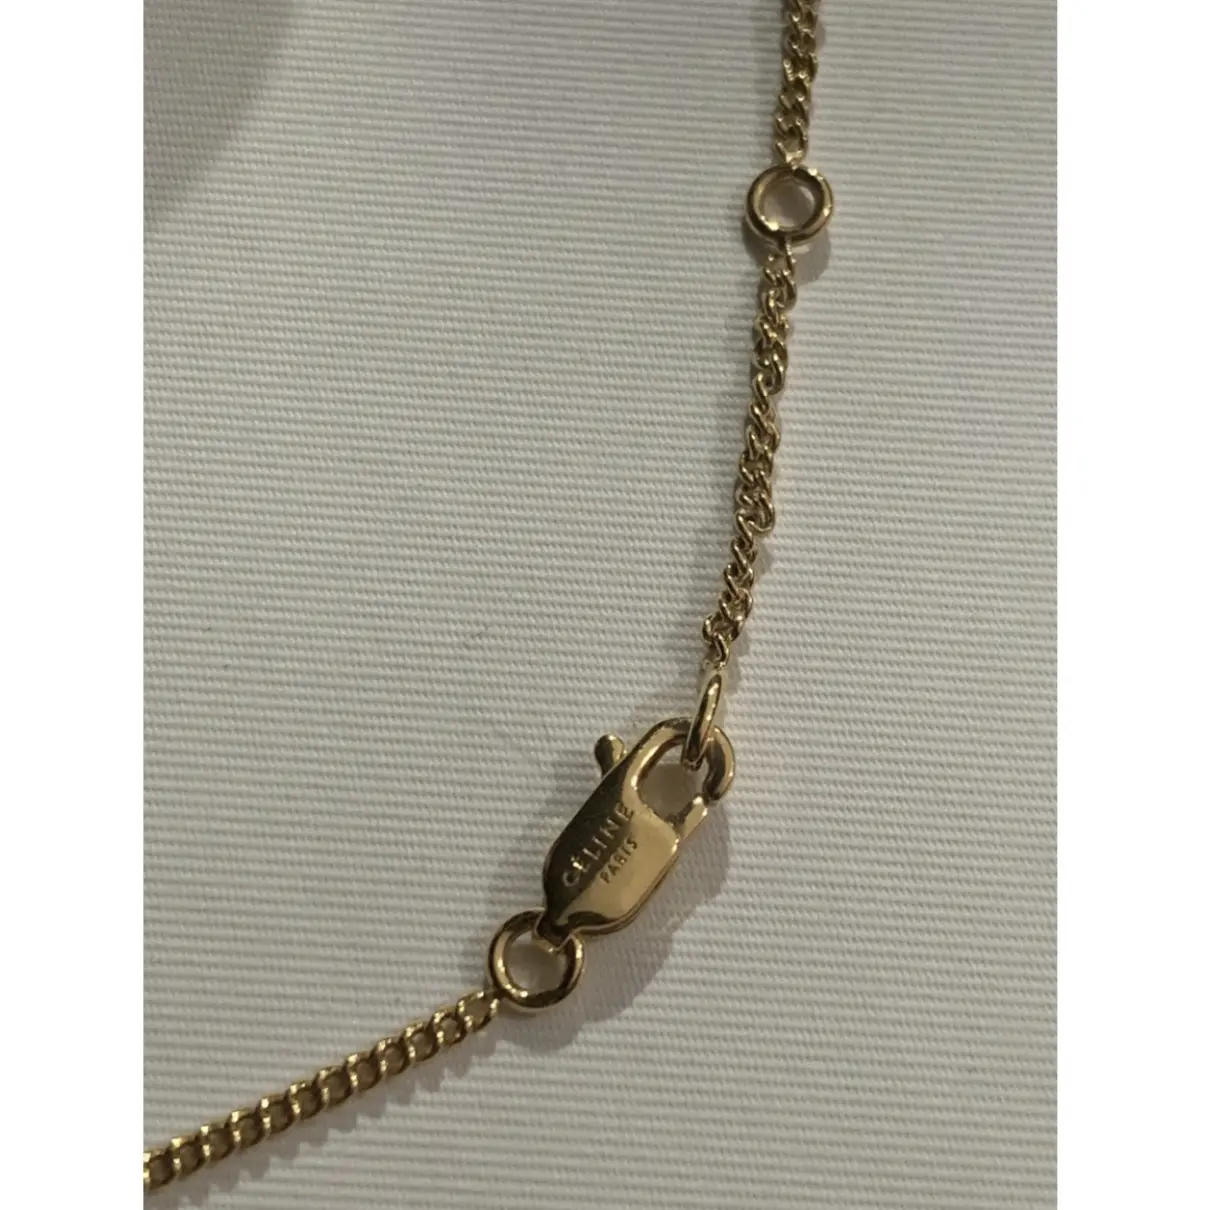 Buy Celine Yellow gold necklace online